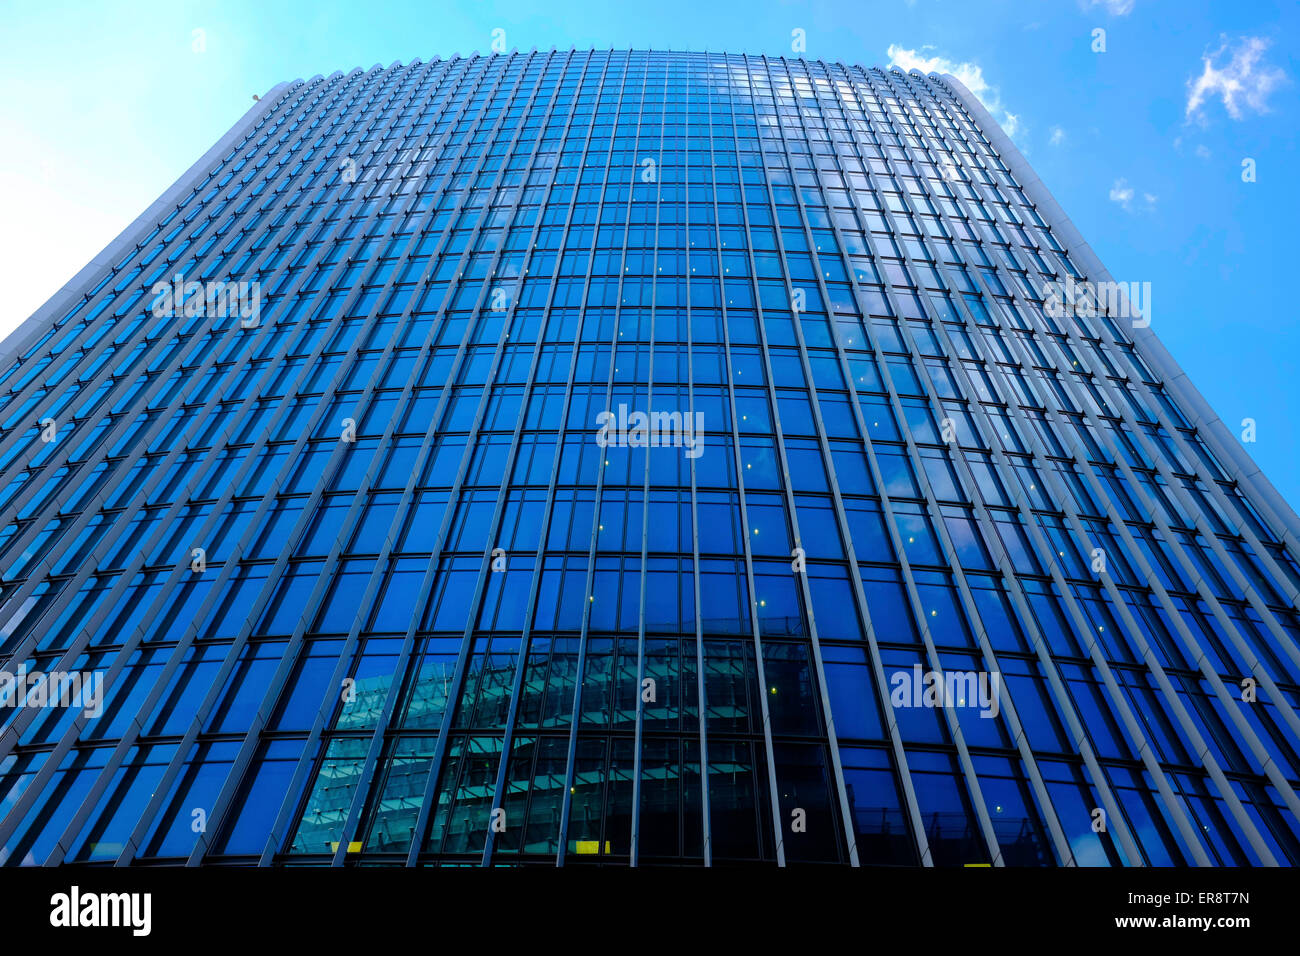 Cutting edge architecture and design at 20 Fenchurch Street also known as the Walkie Talkie Building. Stock Photo